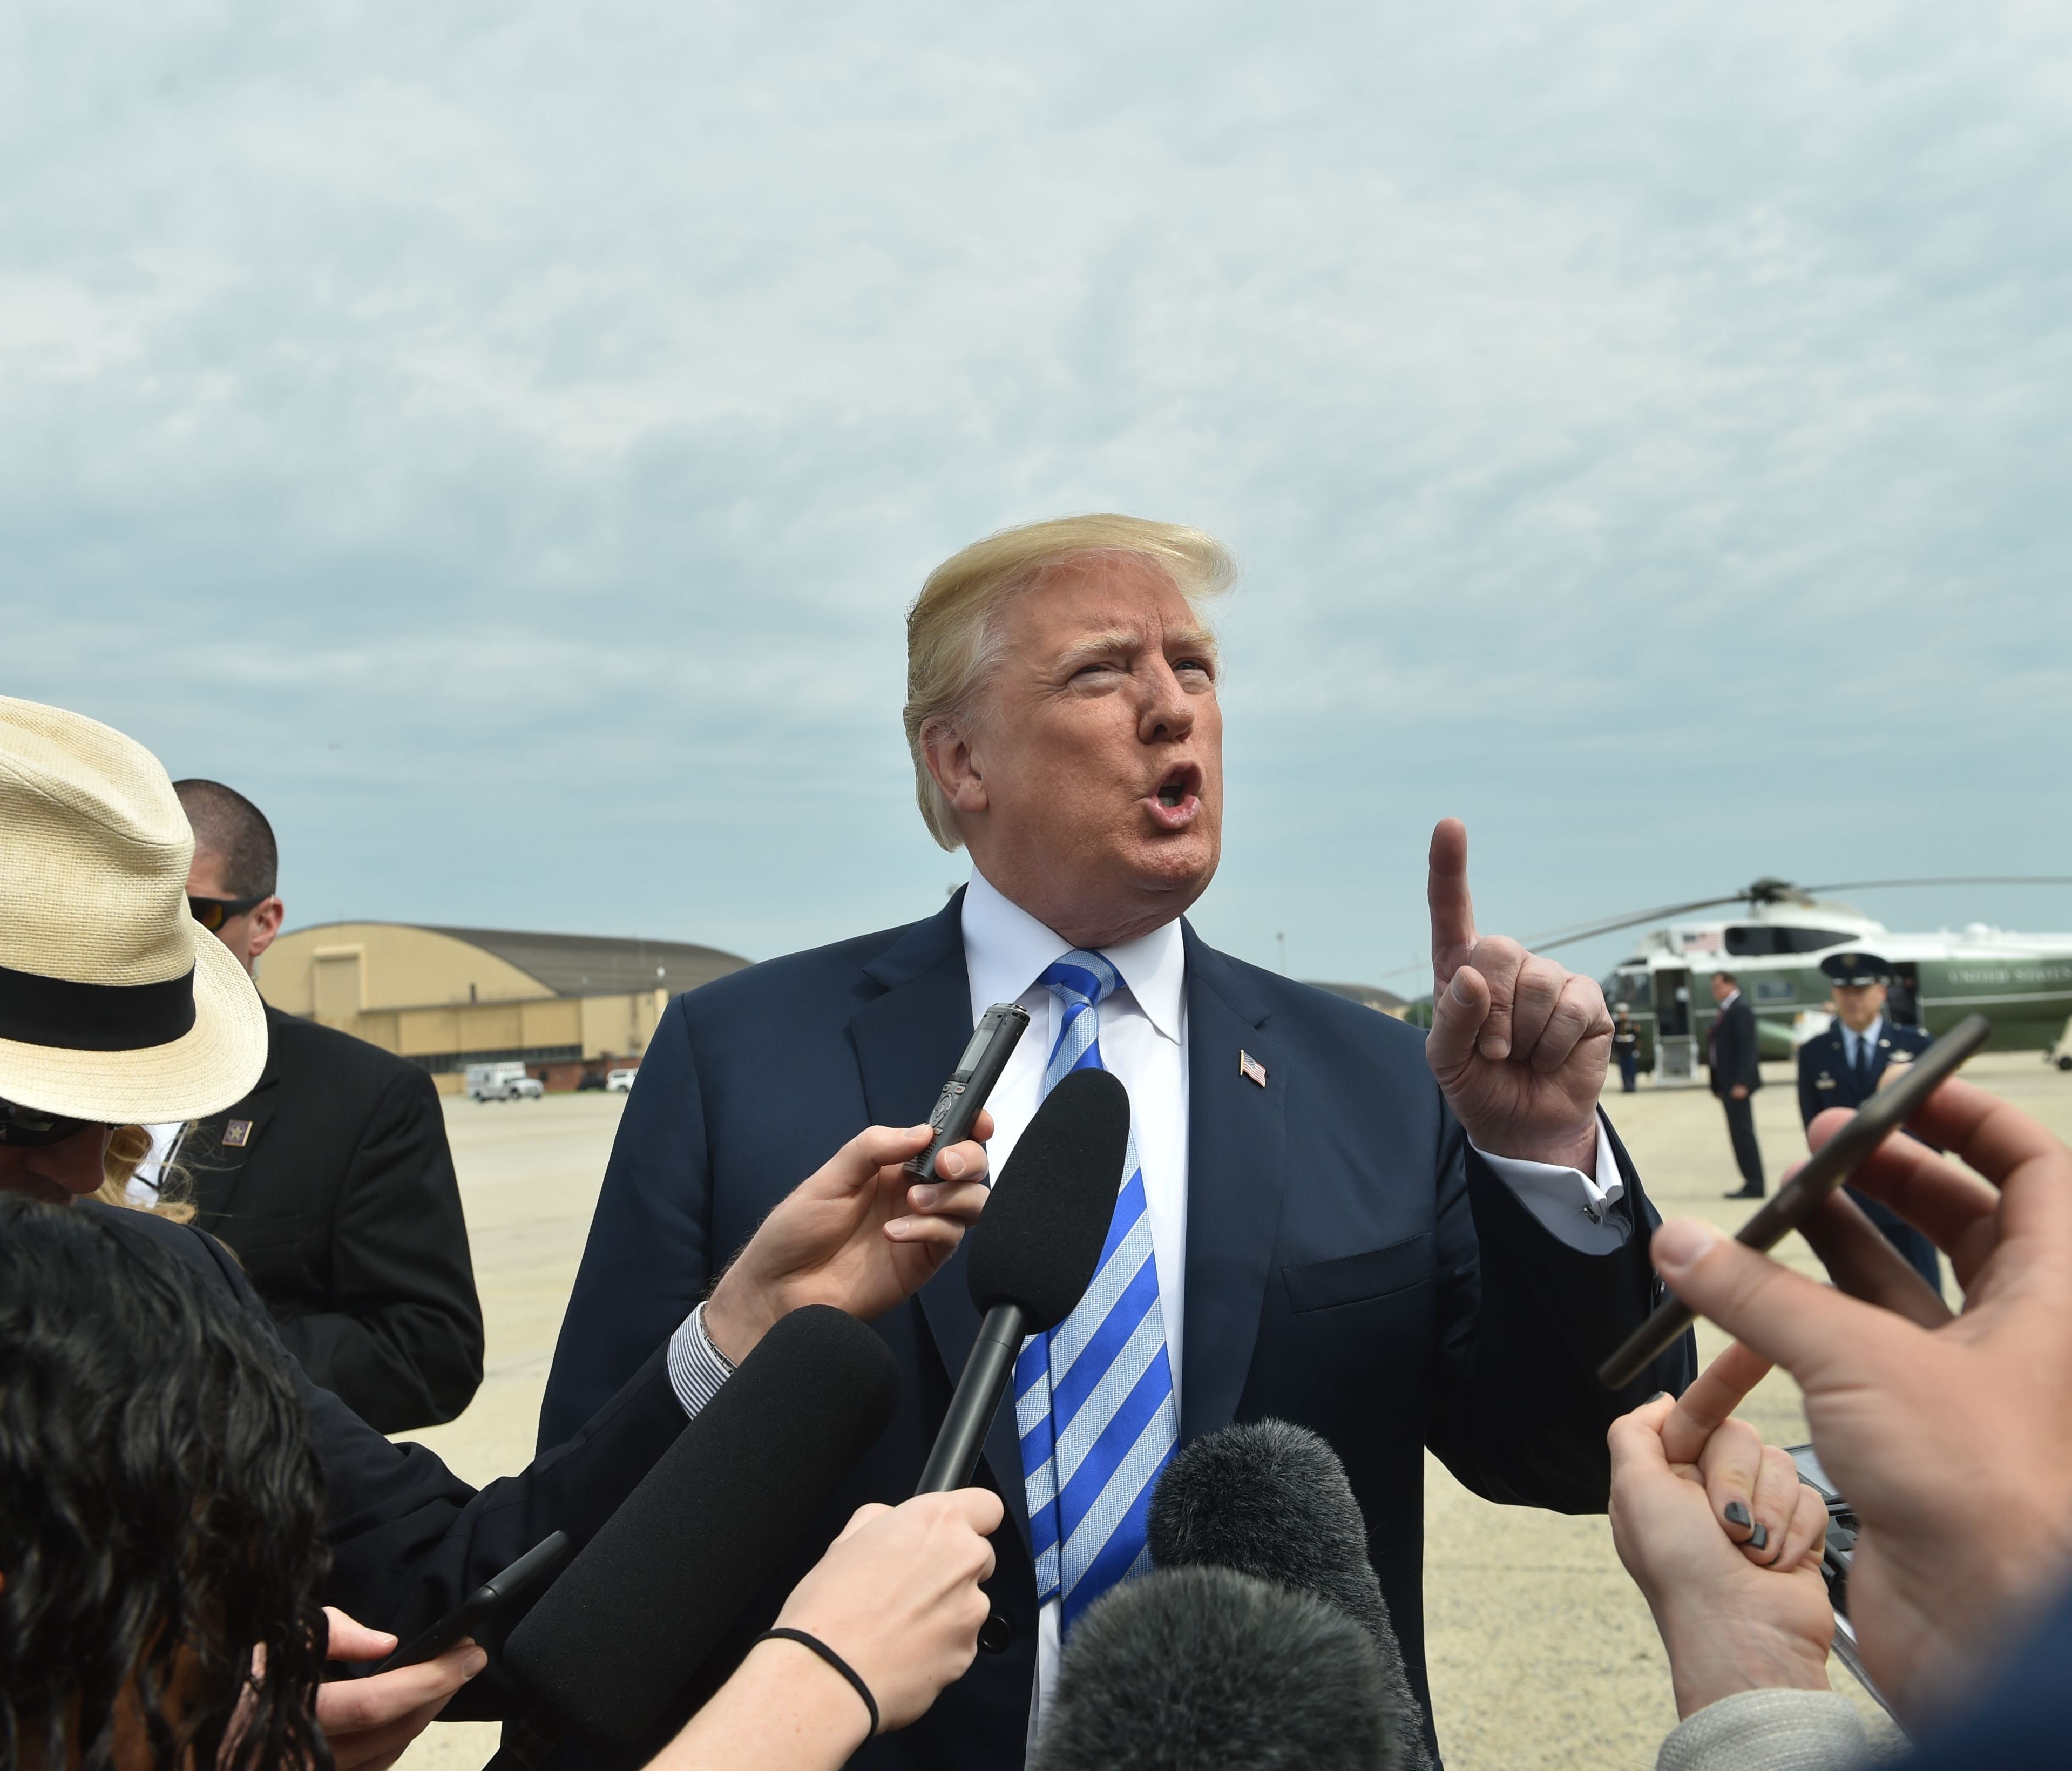 TOPSHOT - US President Donald Trump speaks to the press as he arrives at Dallas Love Field Airport on May 4, 2018 in Dallas, Texas. / AFP PHOTO / Nicholas KammNICHOLAS KAMM/AFP/Getty Images ORIG FILE ID: AFP_14K15Q